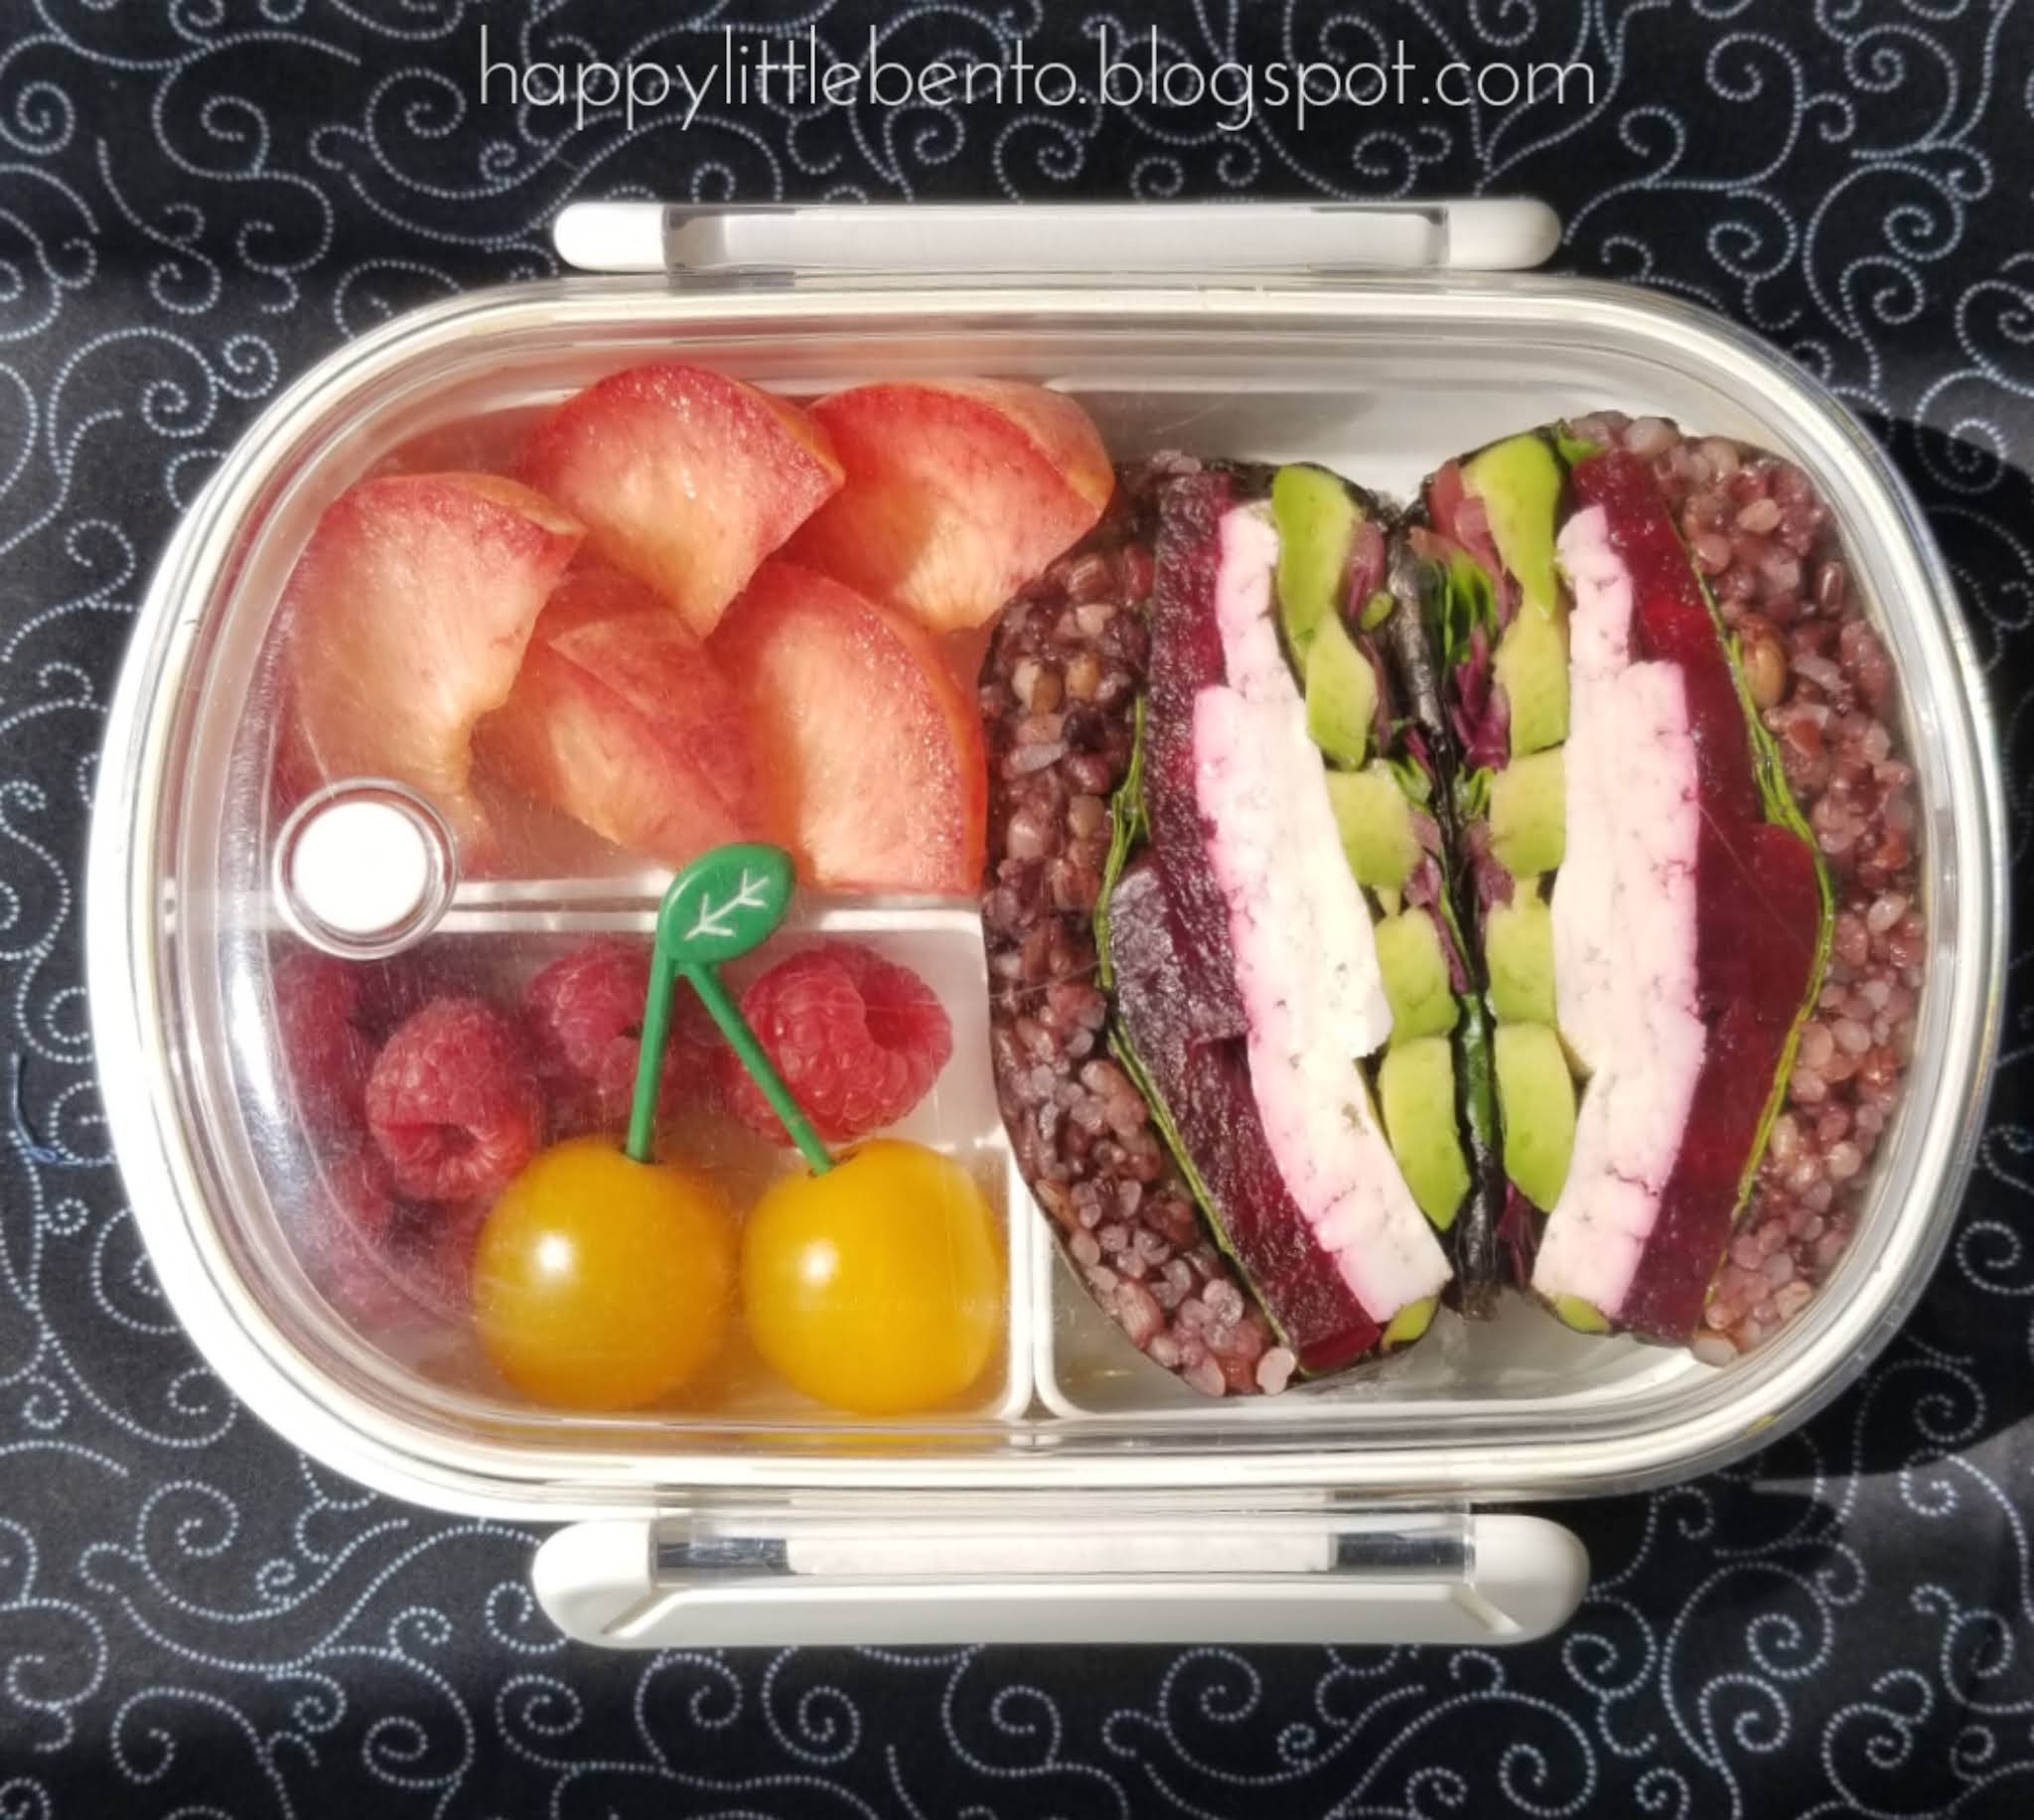 Ichiba London - 【Kids bento box】 While at home, this is a little activity  for the kids for them to make their very own bento box for a picnic at  home. Be